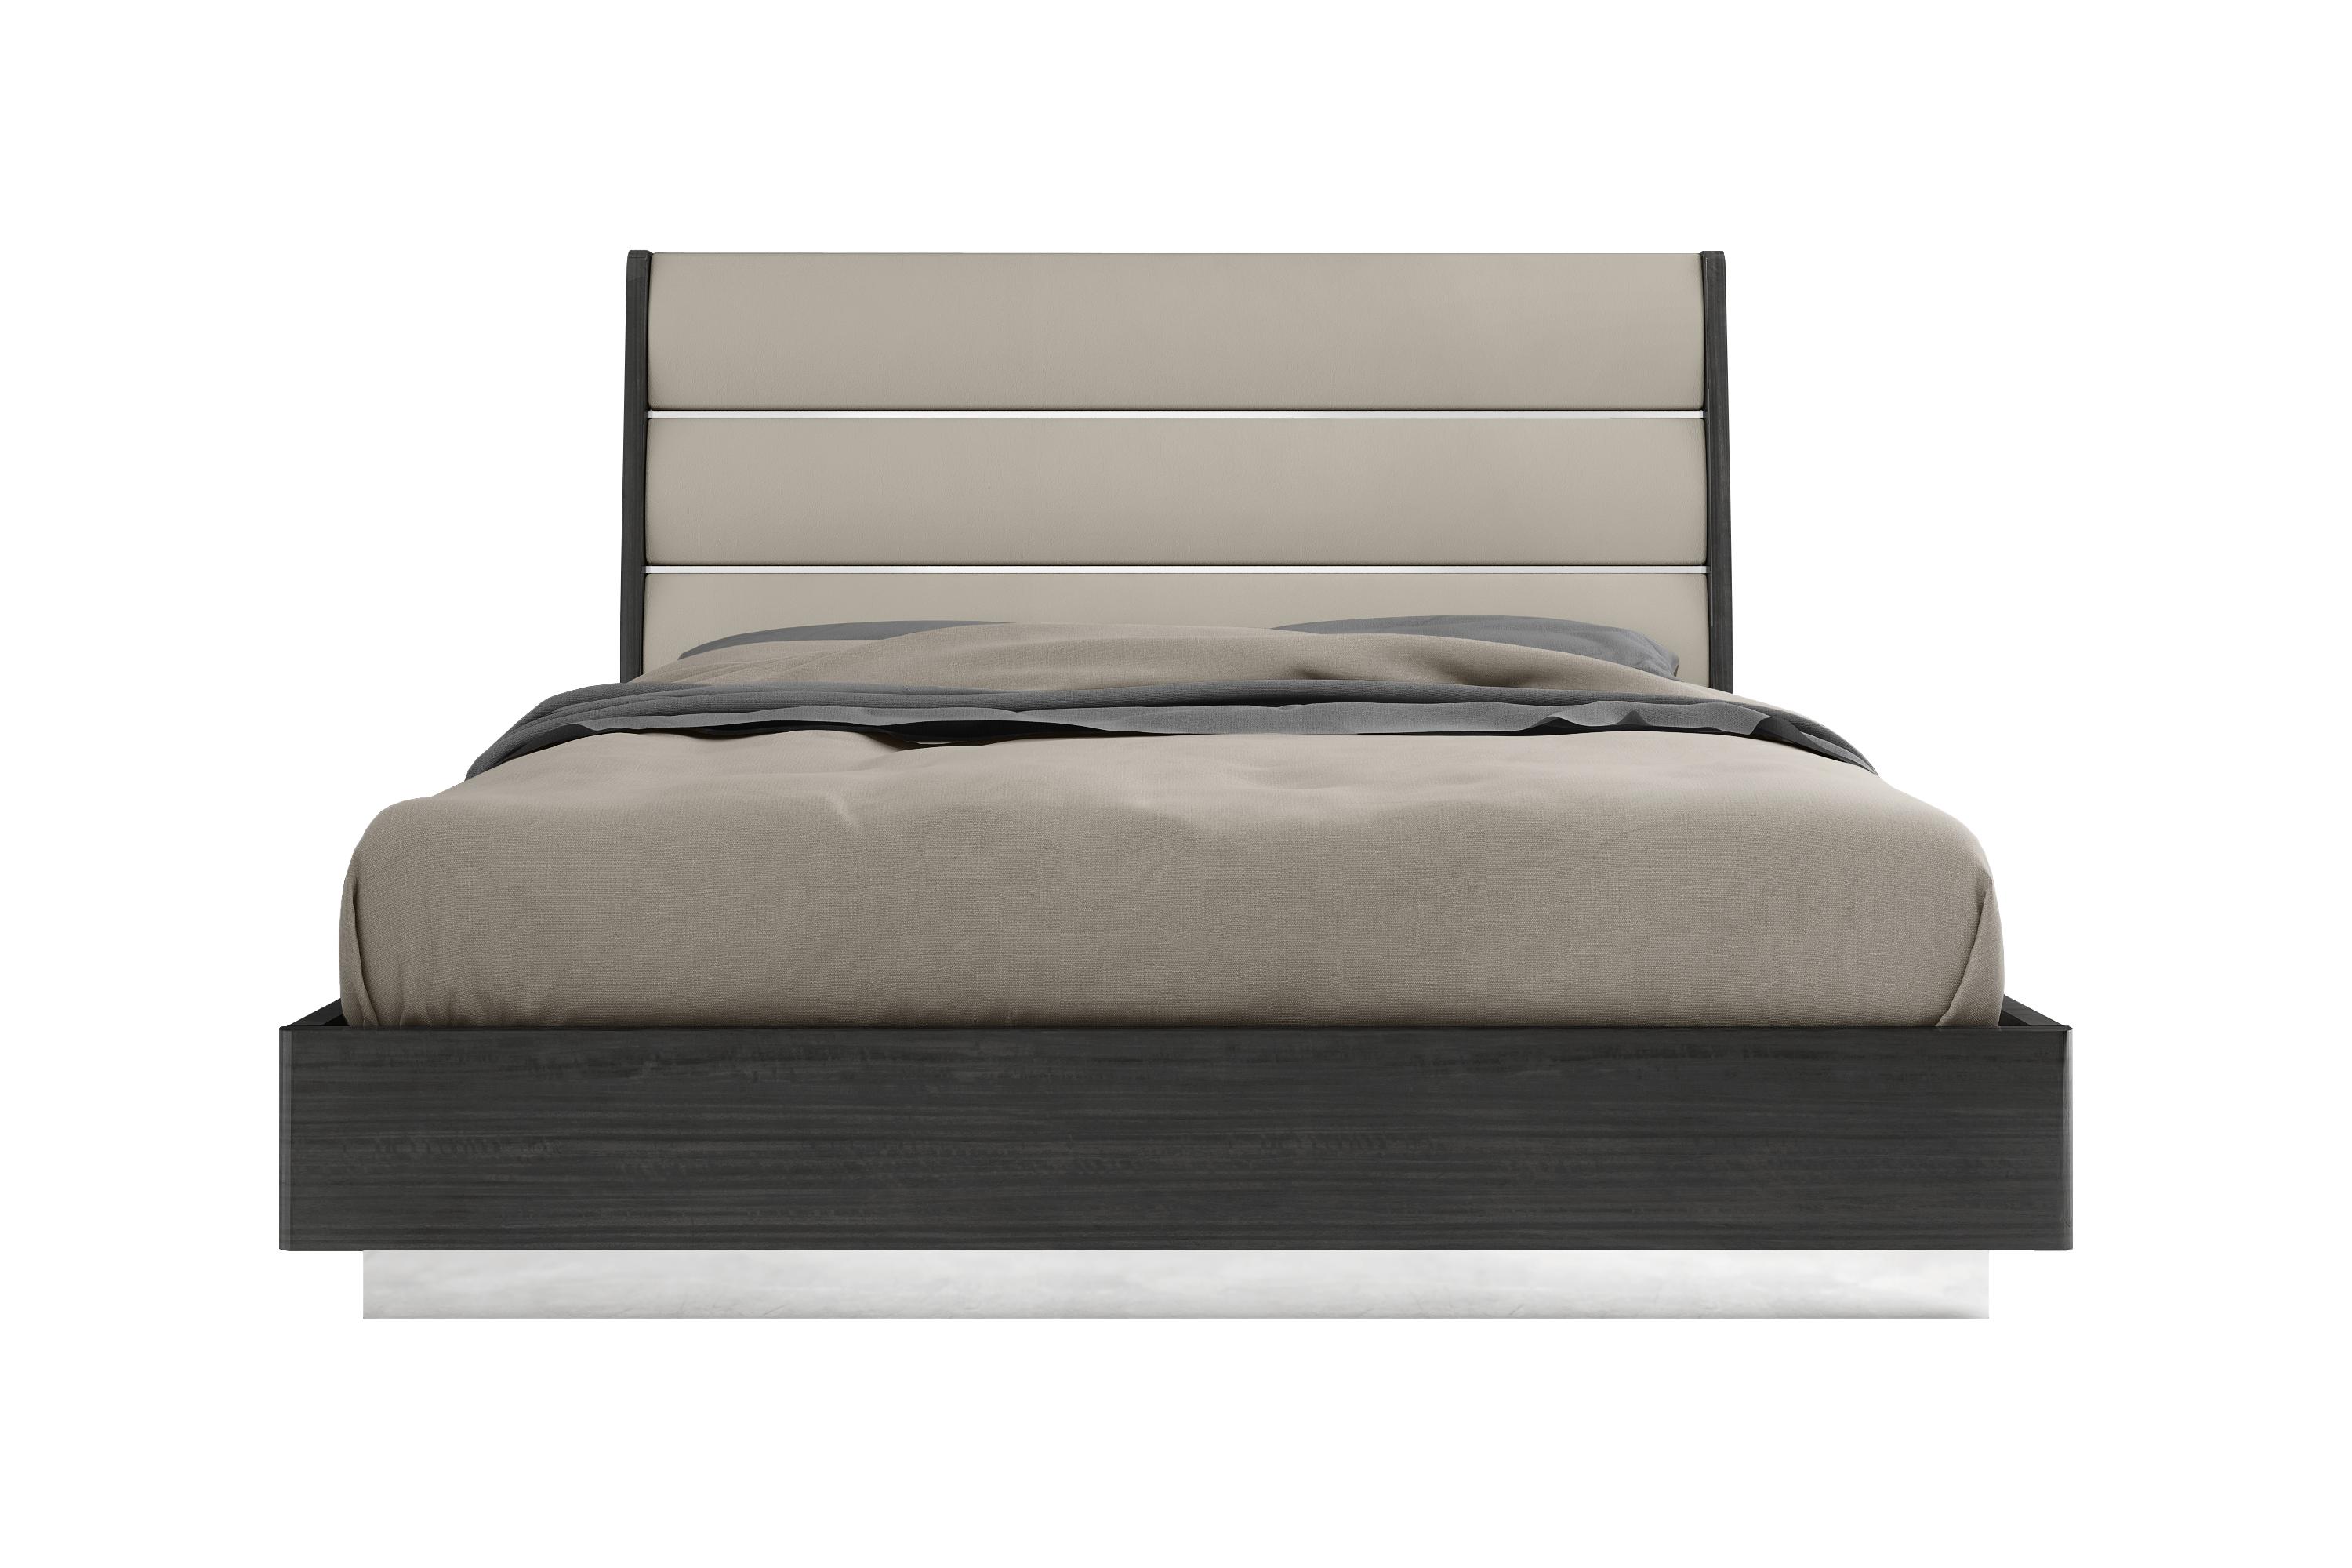 Contemporary Bed BK1752-DGRY/LGRY Pino BK1752-DGRY/LGRY in Dark Gray Faux Leather